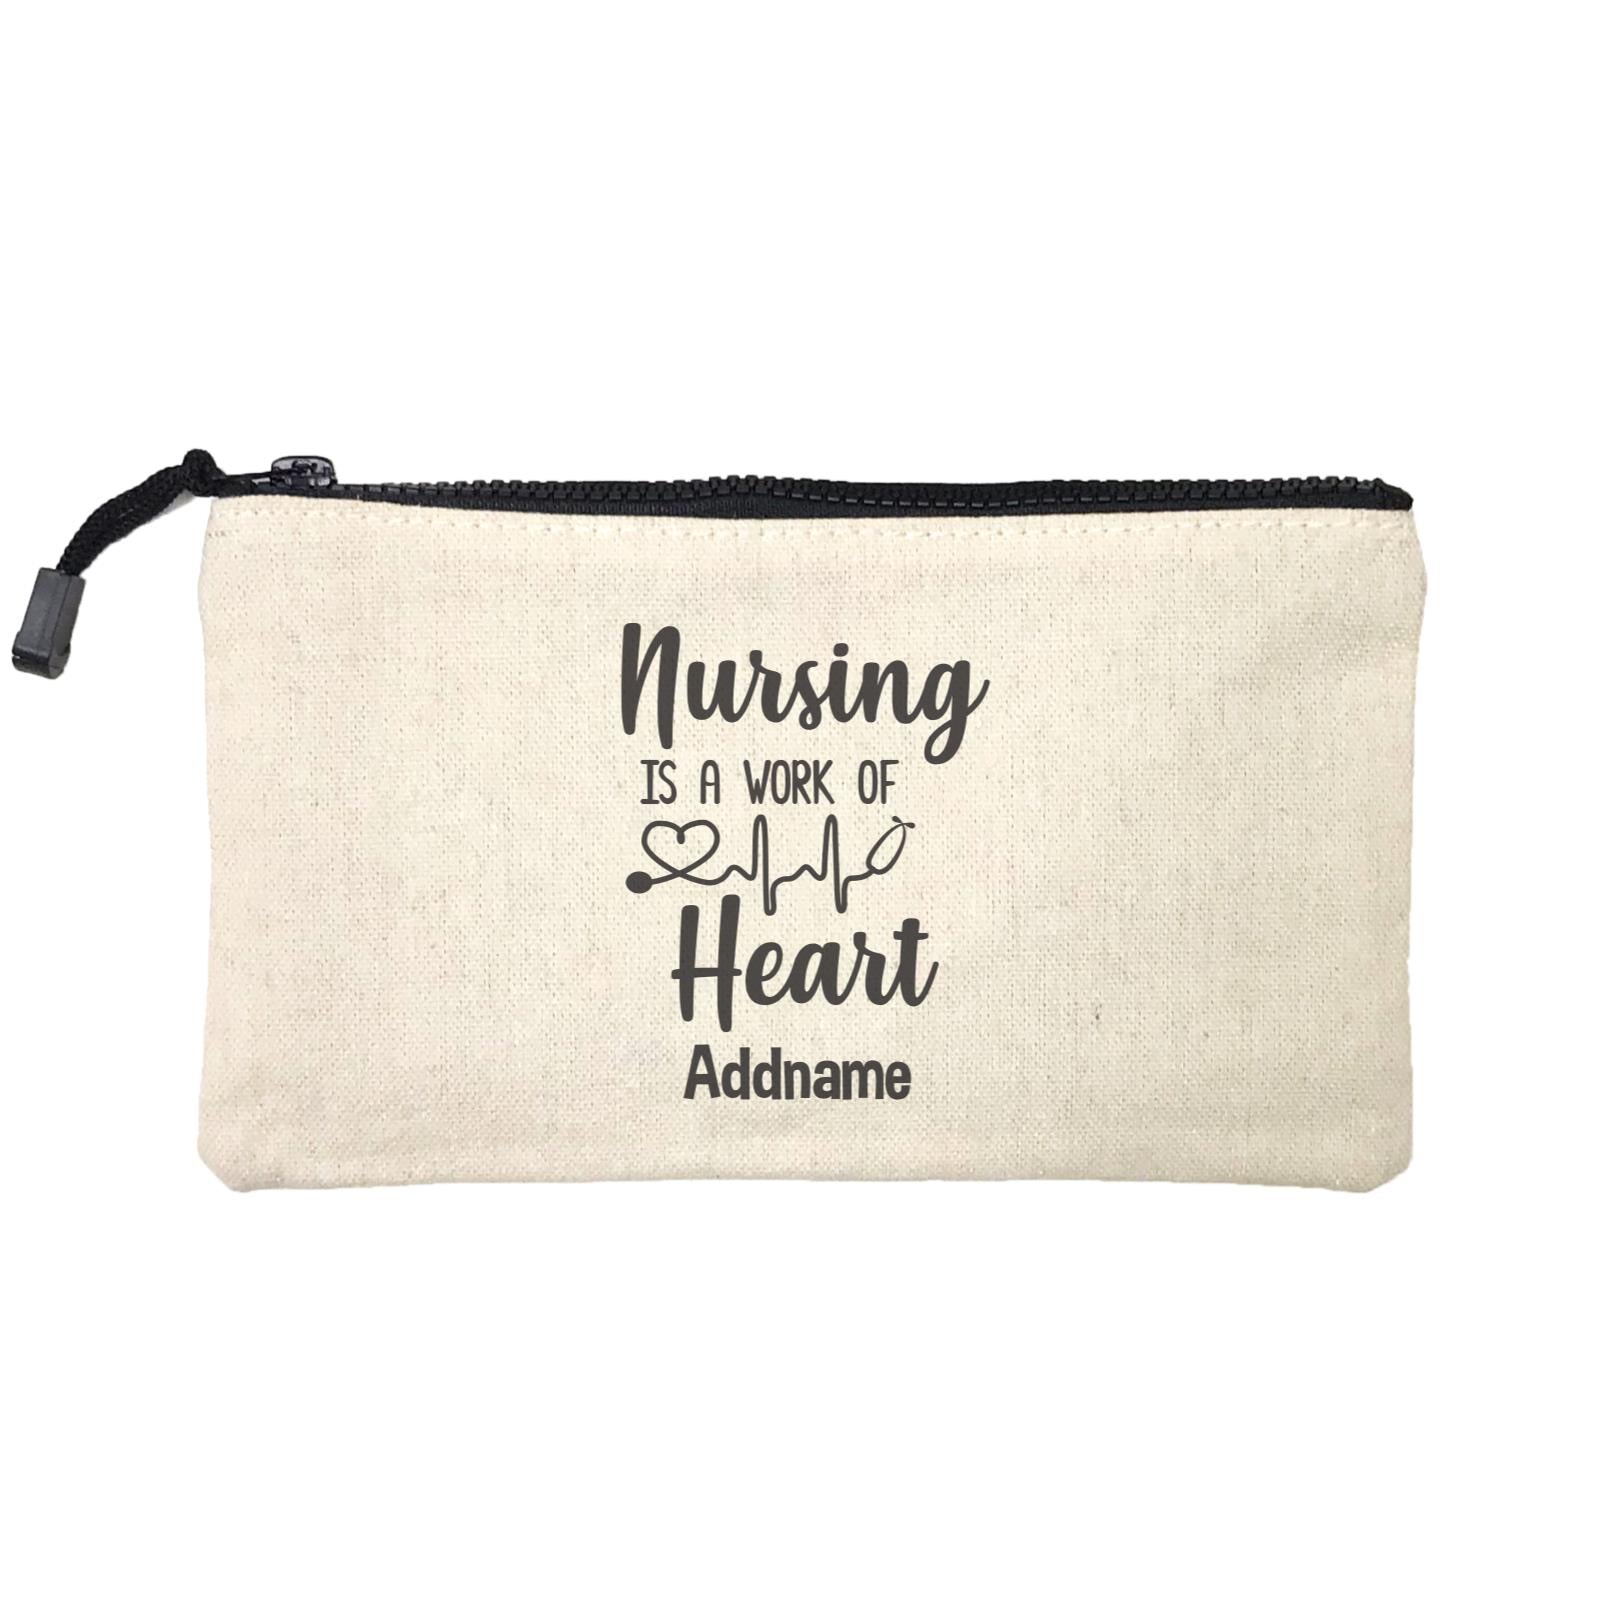 Nursing Is A Work of Heart Mini Accessories Stationery Pouch